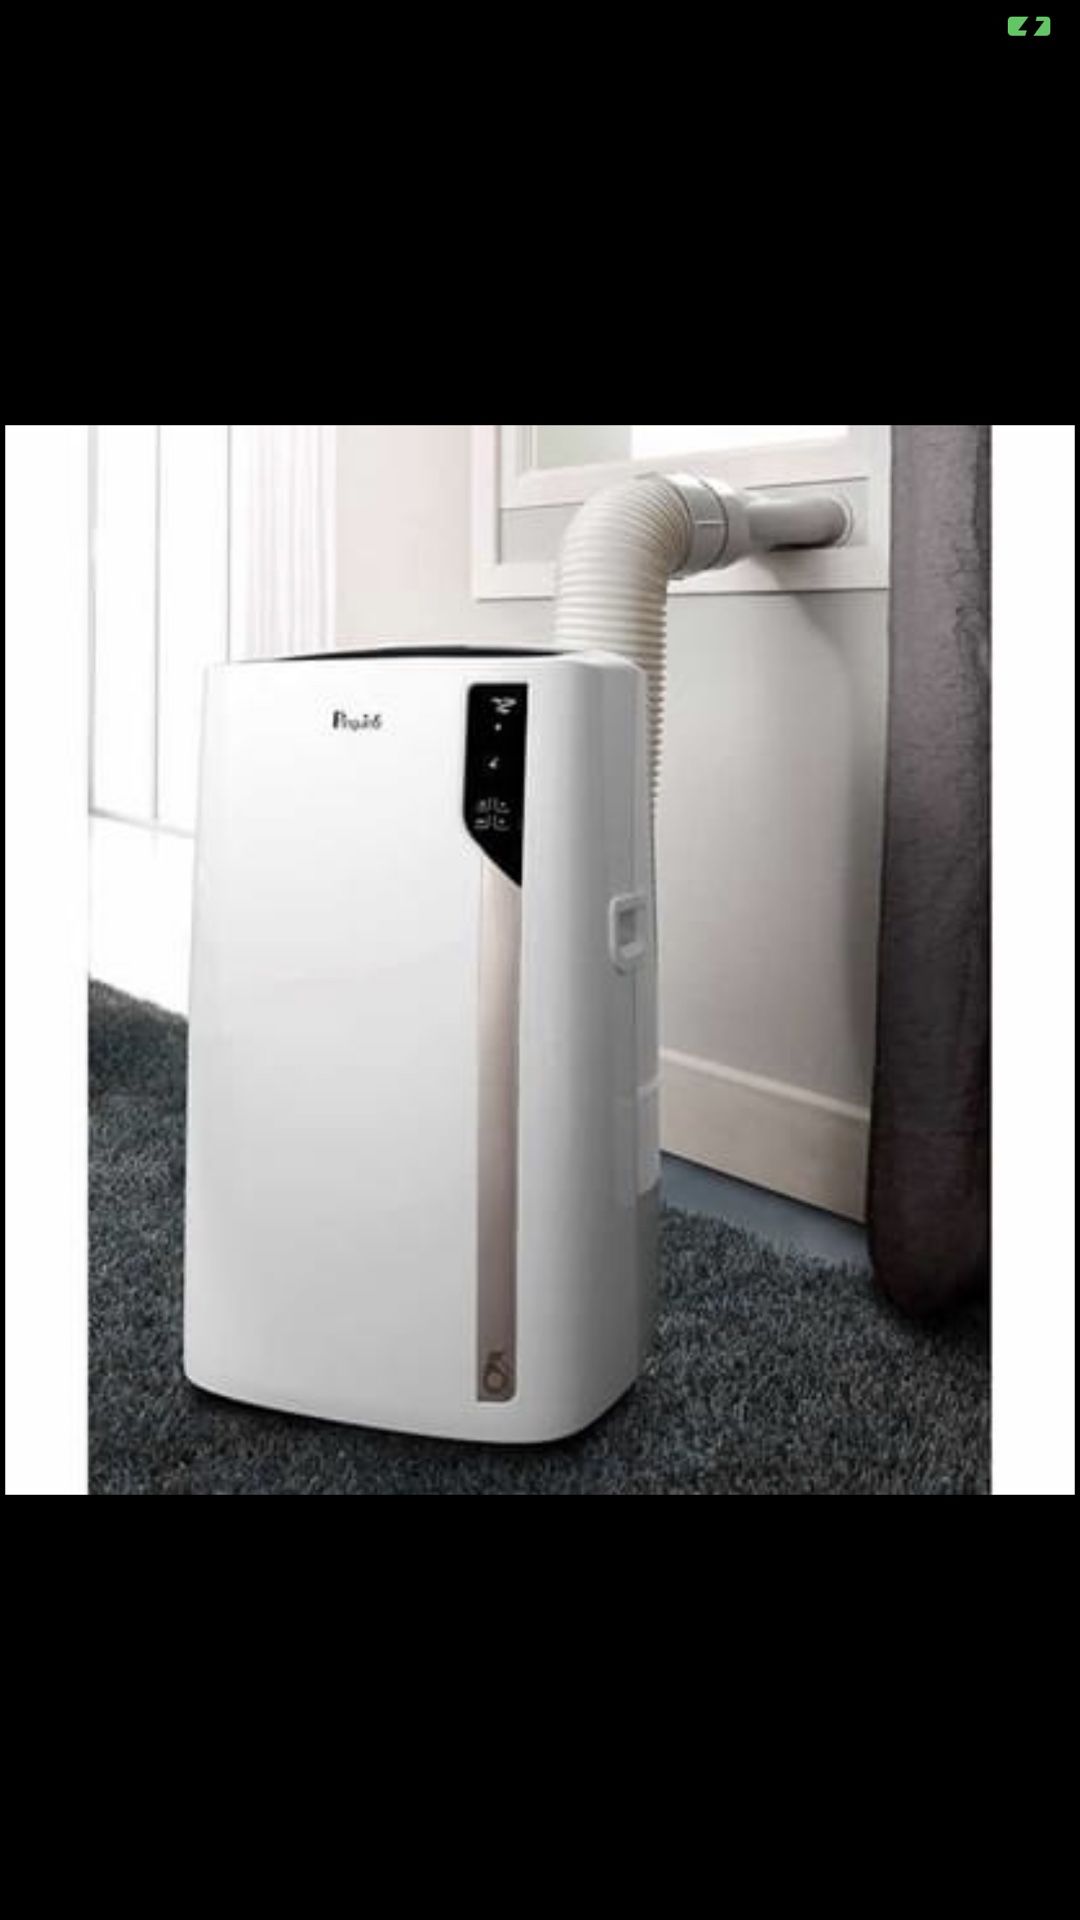 🔥Brand New🔥 Air Conditioner, Heater, Dehumidifier, Fan 500 sq ft 4 in 1 All Season Use